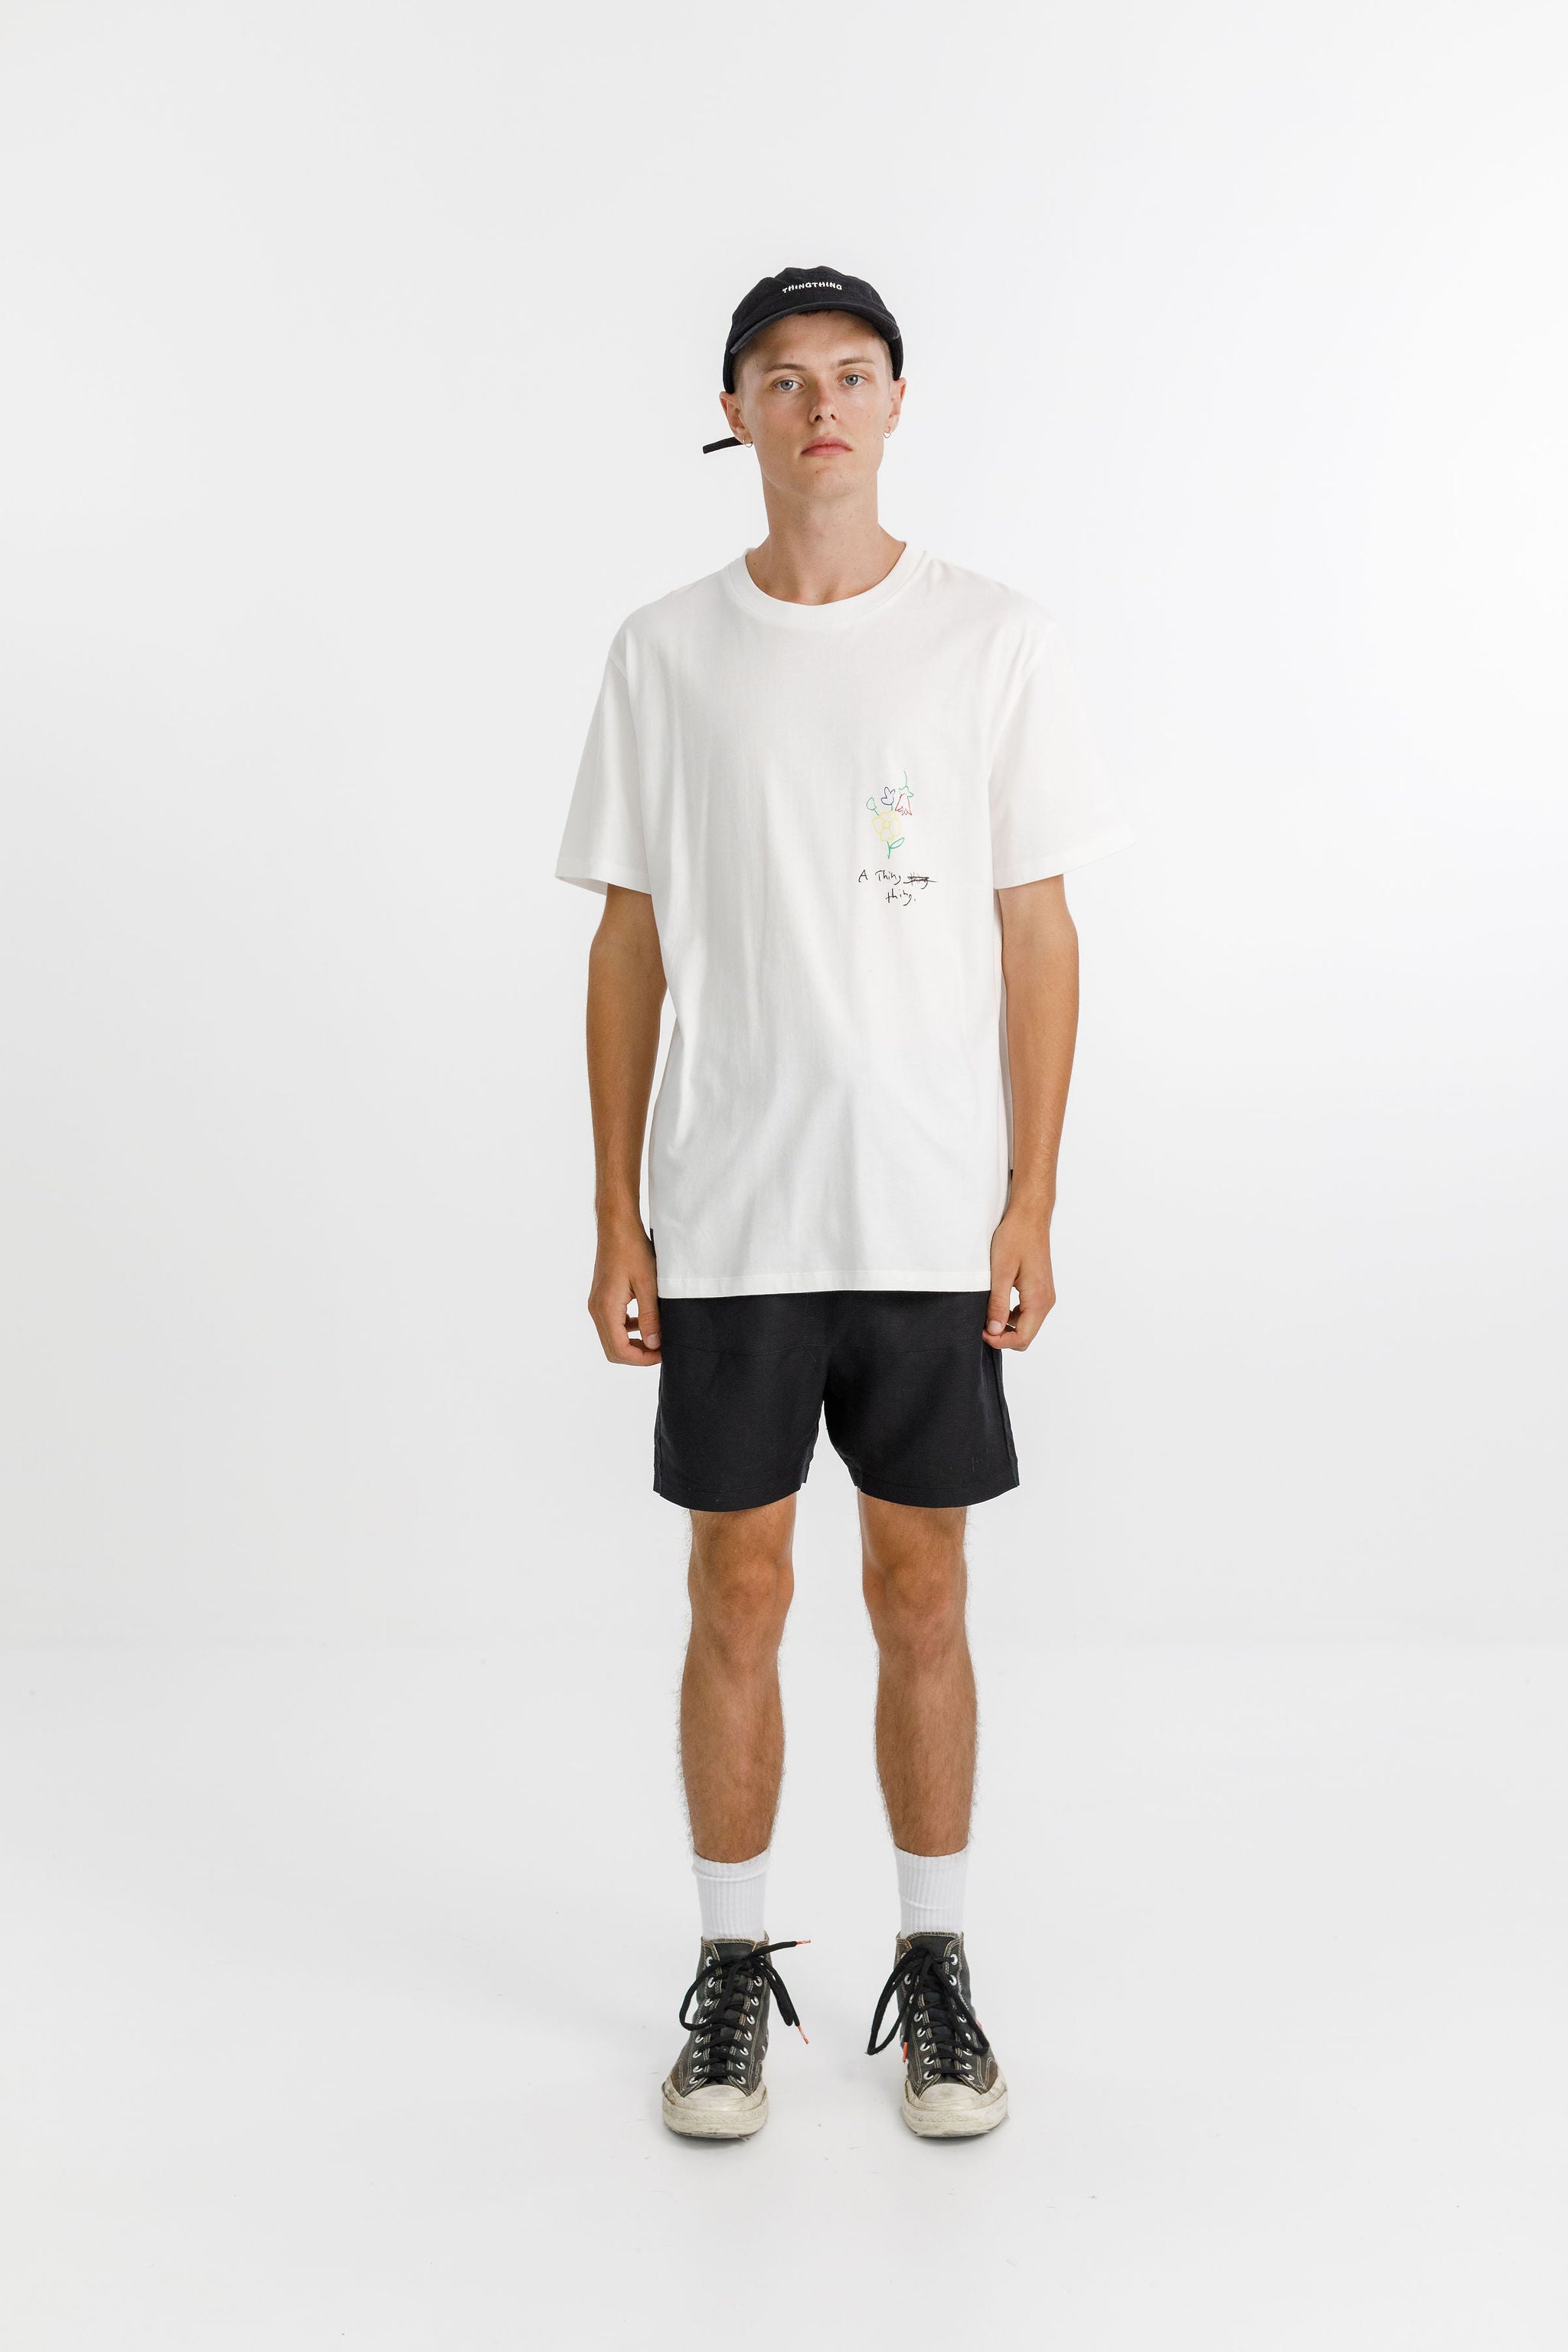 SS Tee - Sale - White with Scribble Print